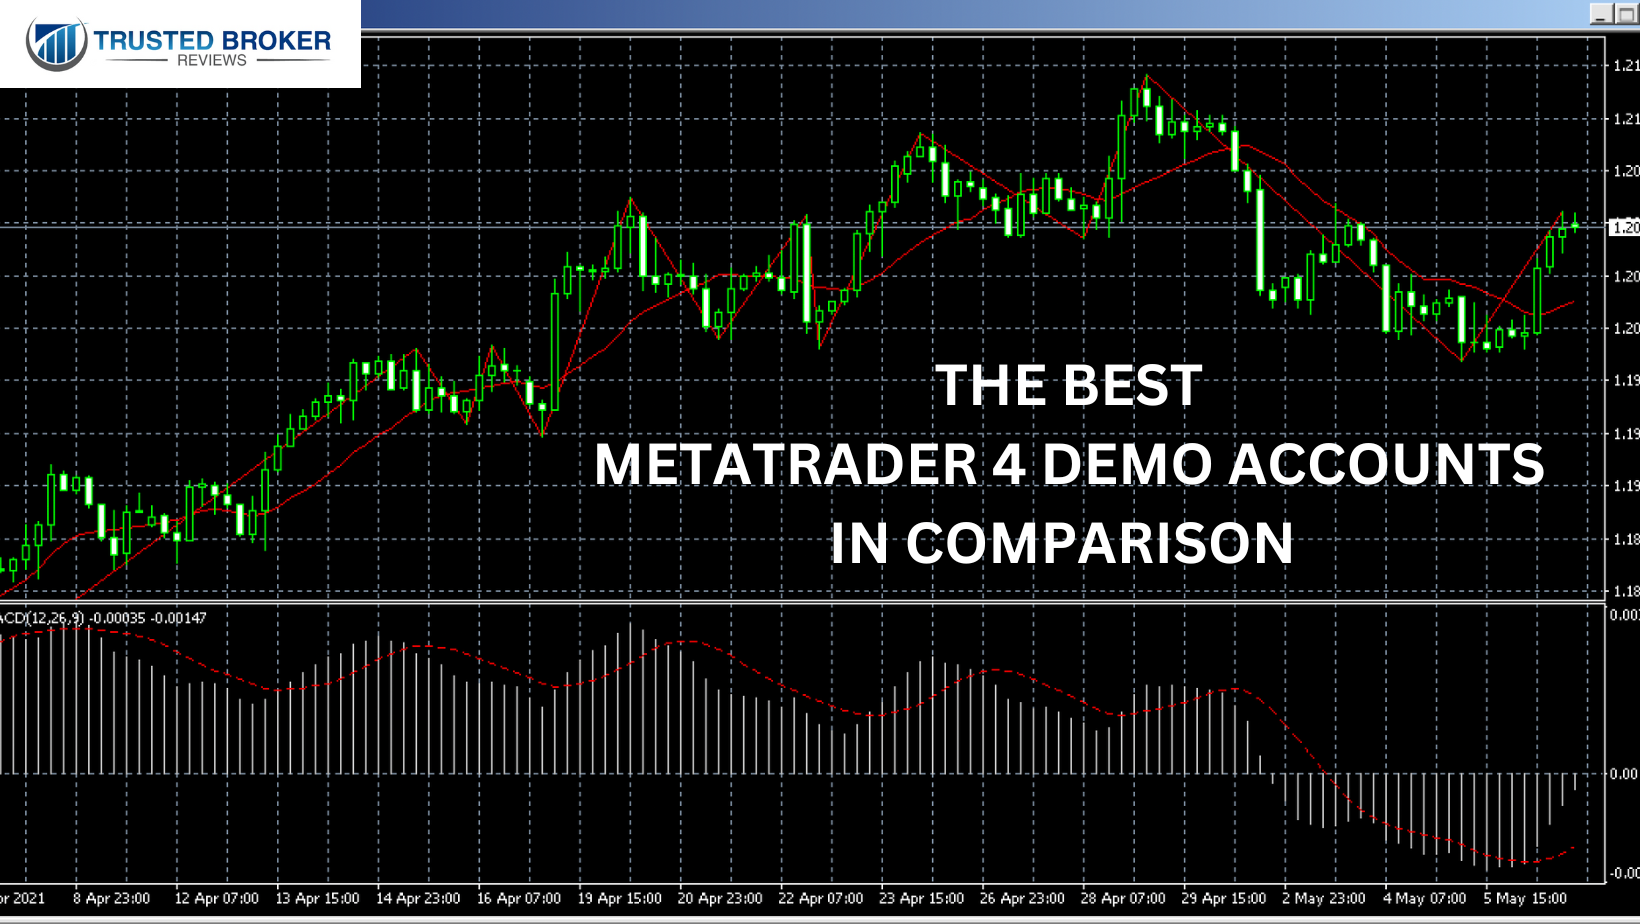 The best MetaTrader 4 demo accounts in comparison for traders